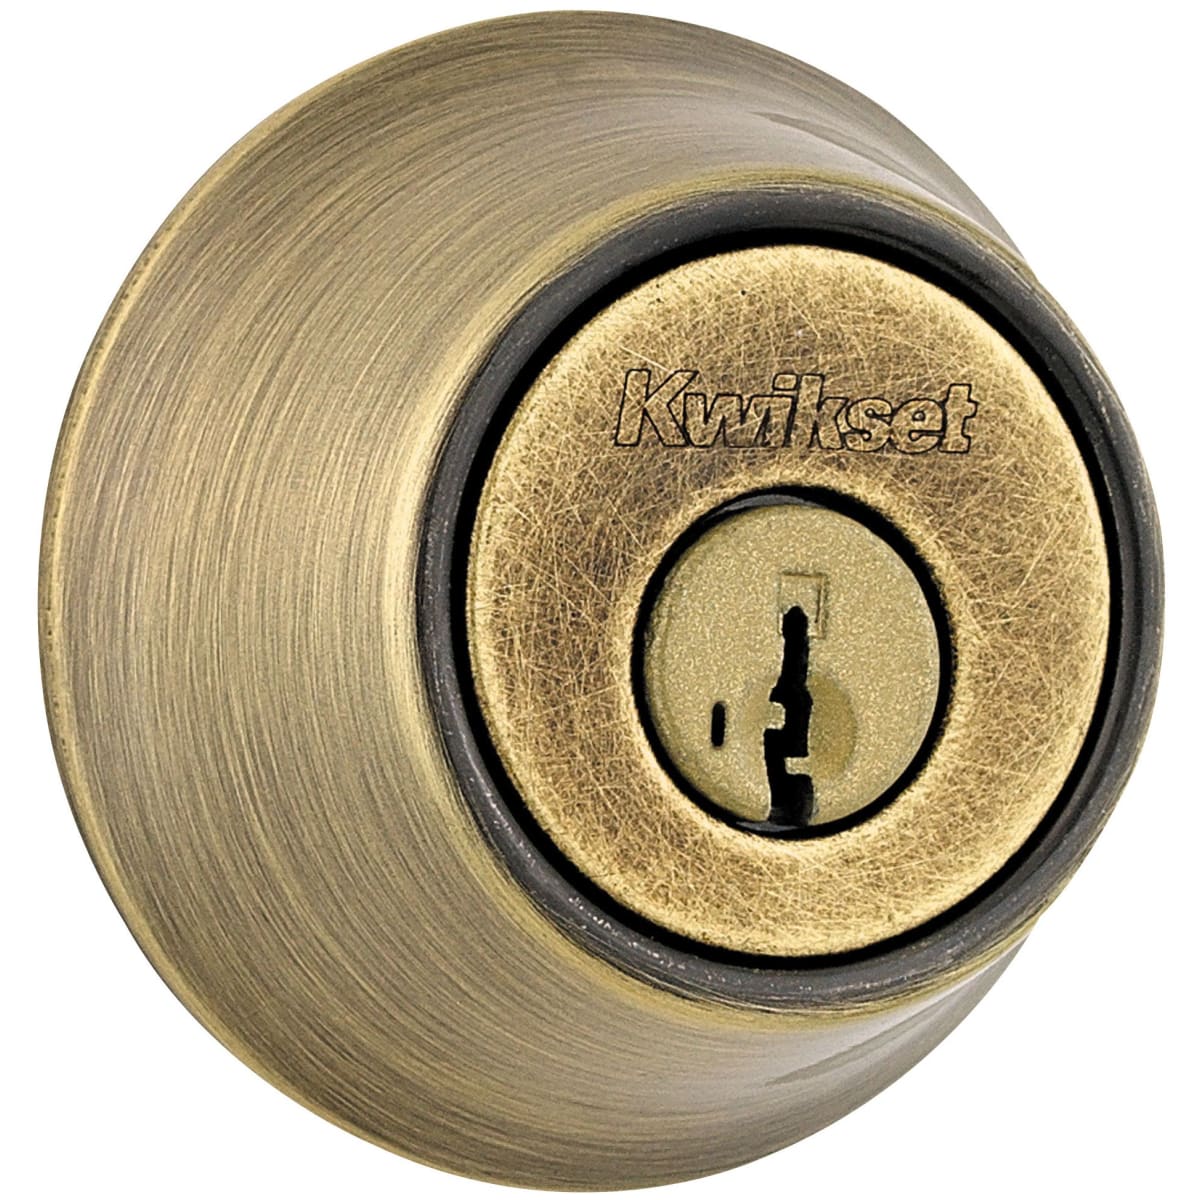 Kwikset 665-5SV1 Double Cylinder Deadbolt with SmartKey